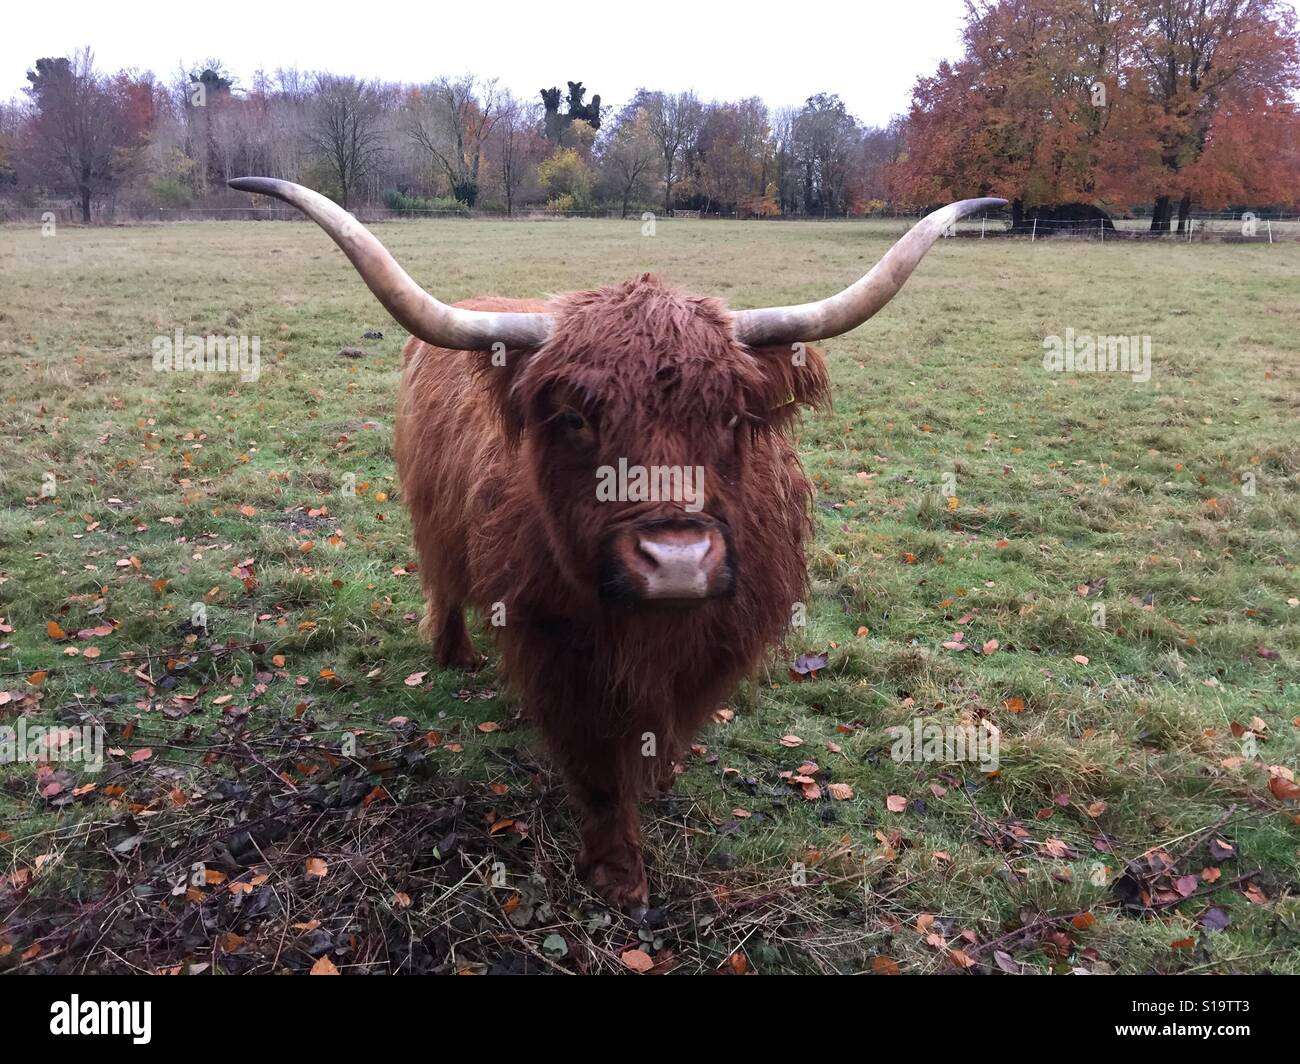 Long horn cow in autumn with stunning symmetrical horns Stock Photo